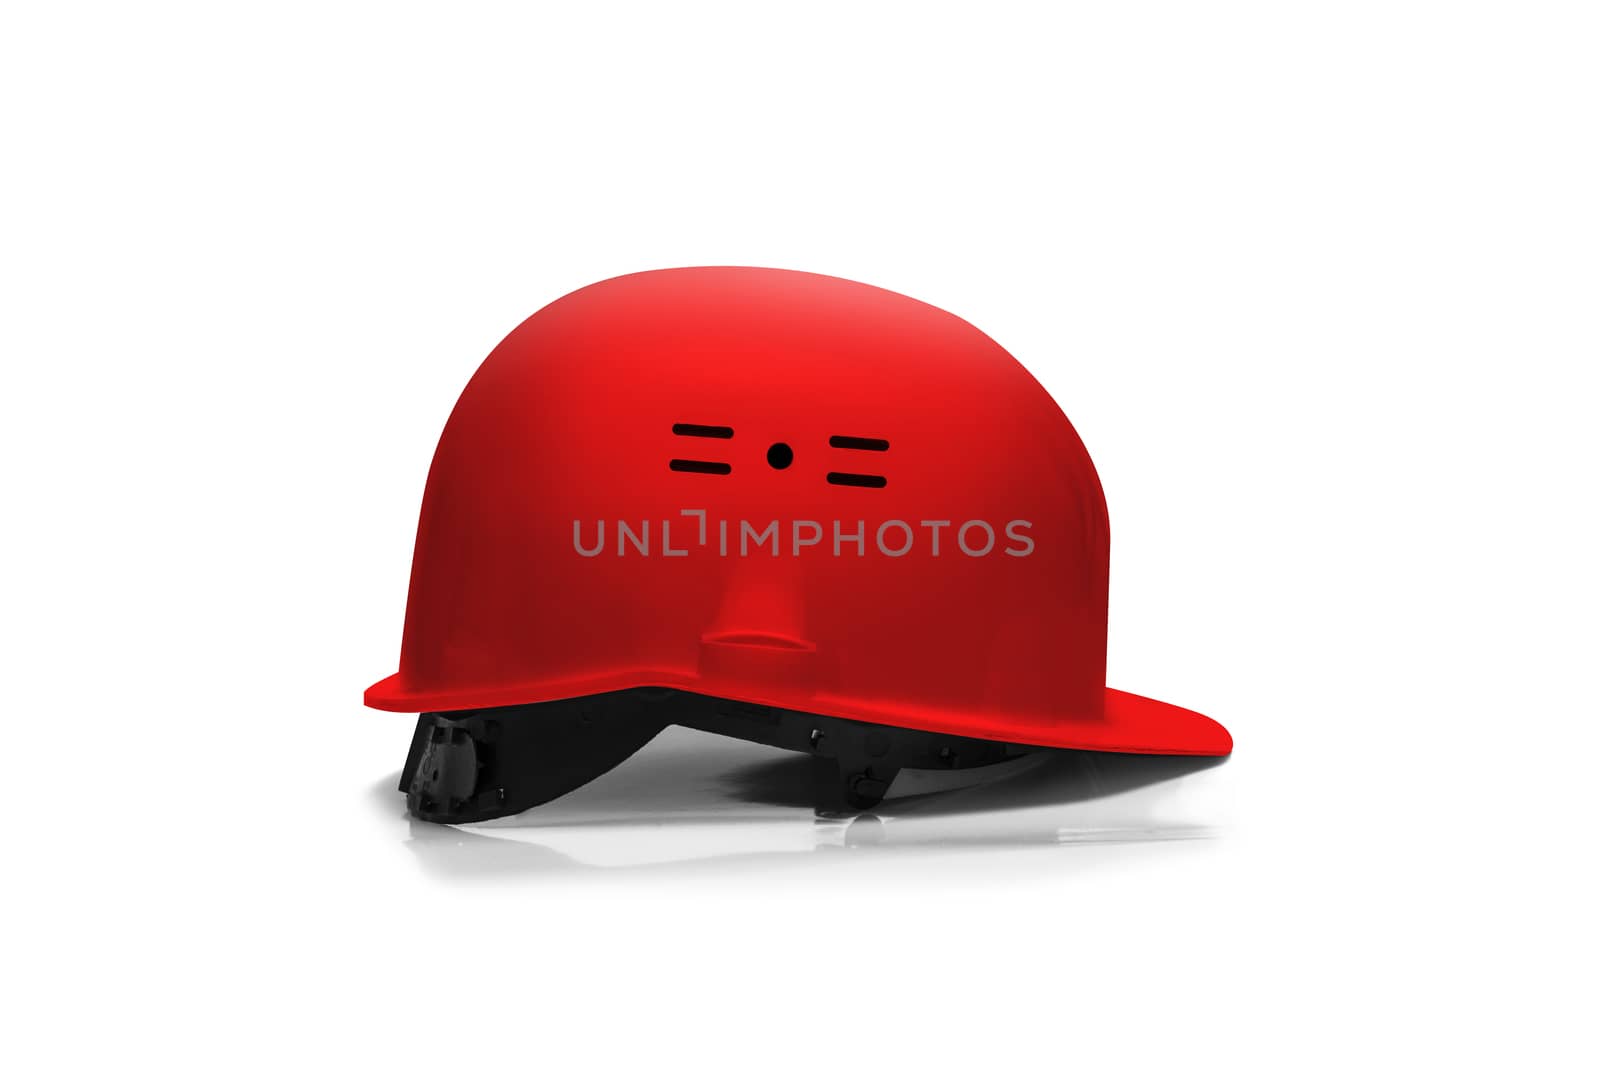 Red Plastic safety helmet isolated on white background